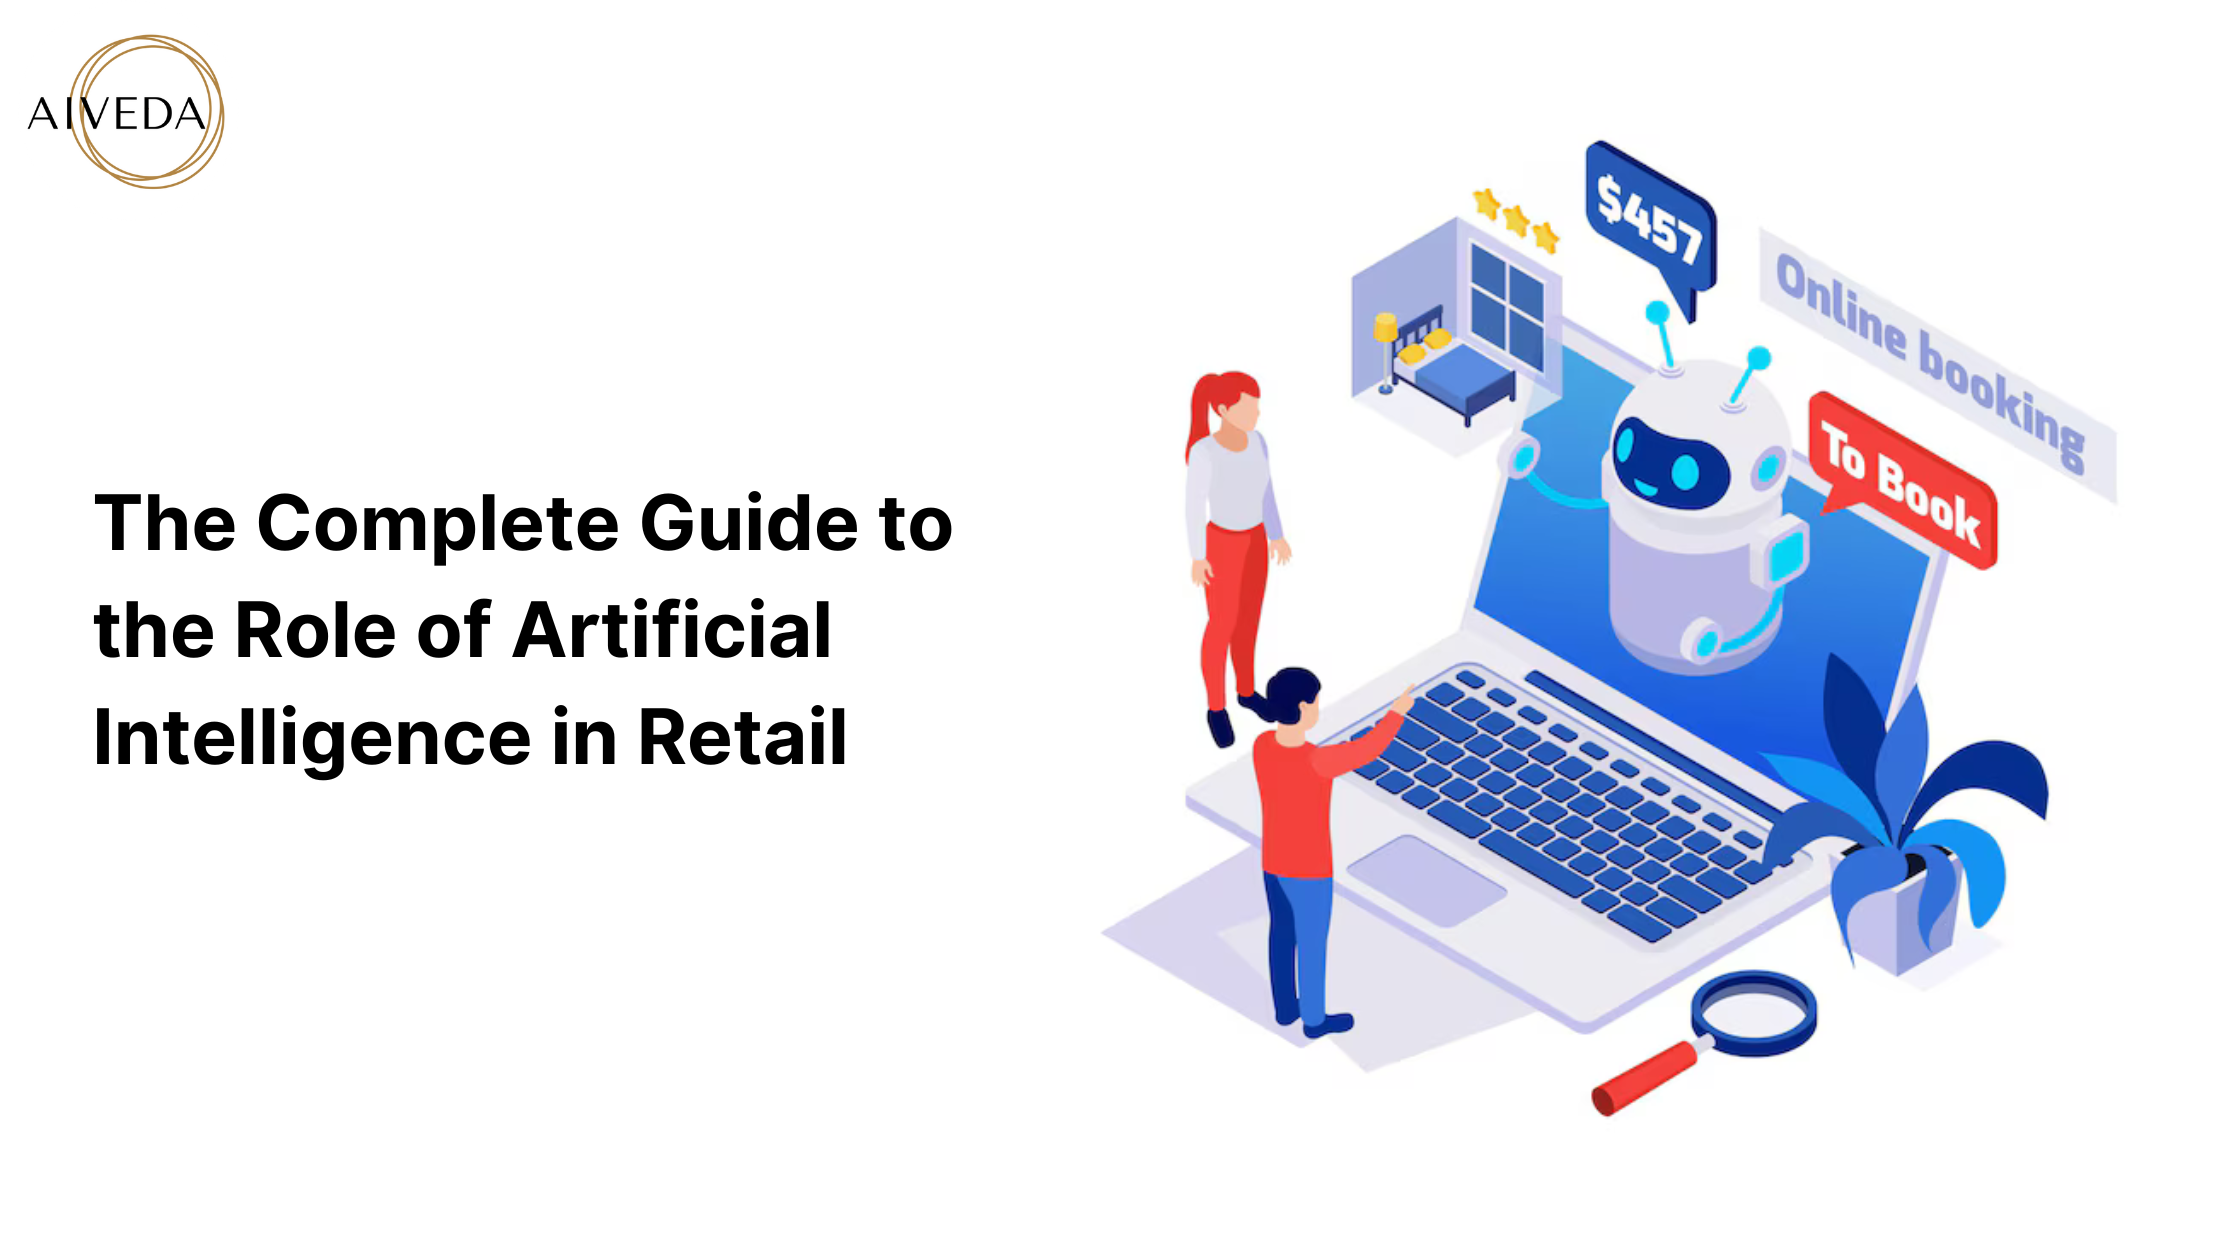 The Complete Guide to the Role of Artificial Intelligence in Retail